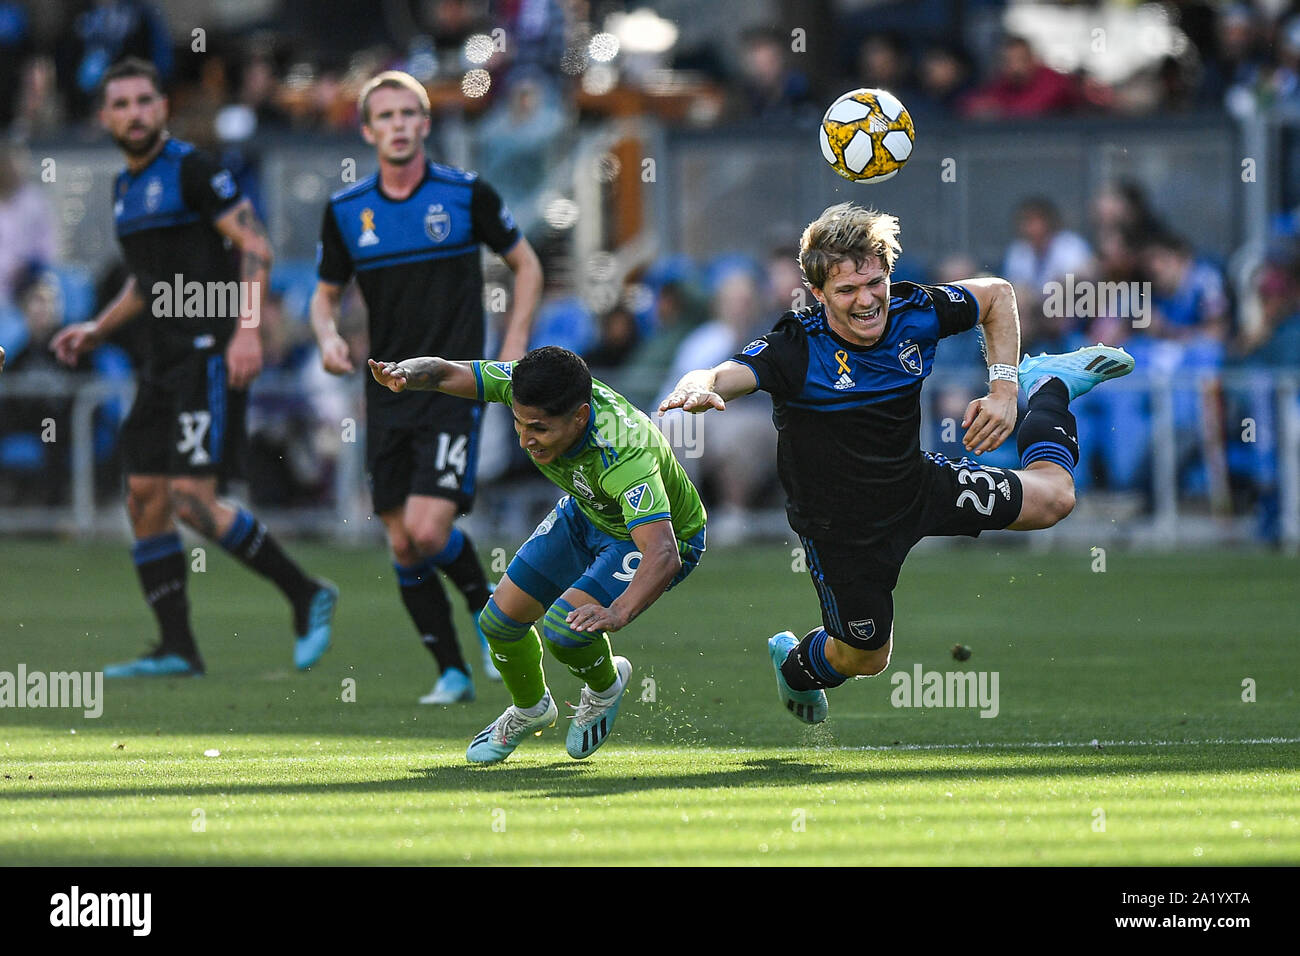 San Jose, California, USA. 29th Sep, 2019. San Jose Earthquakes midfielder Florian Jungwirth (23) and Seattle Sounders forward Raul Ruidiaz (9) chase a ball during the MLS match between the Seattle Sounders and the San Jose Earthquakes at Avaya Stadium in San Jose, California. Chris Brown/CSM/Alamy Live News Stock Photo